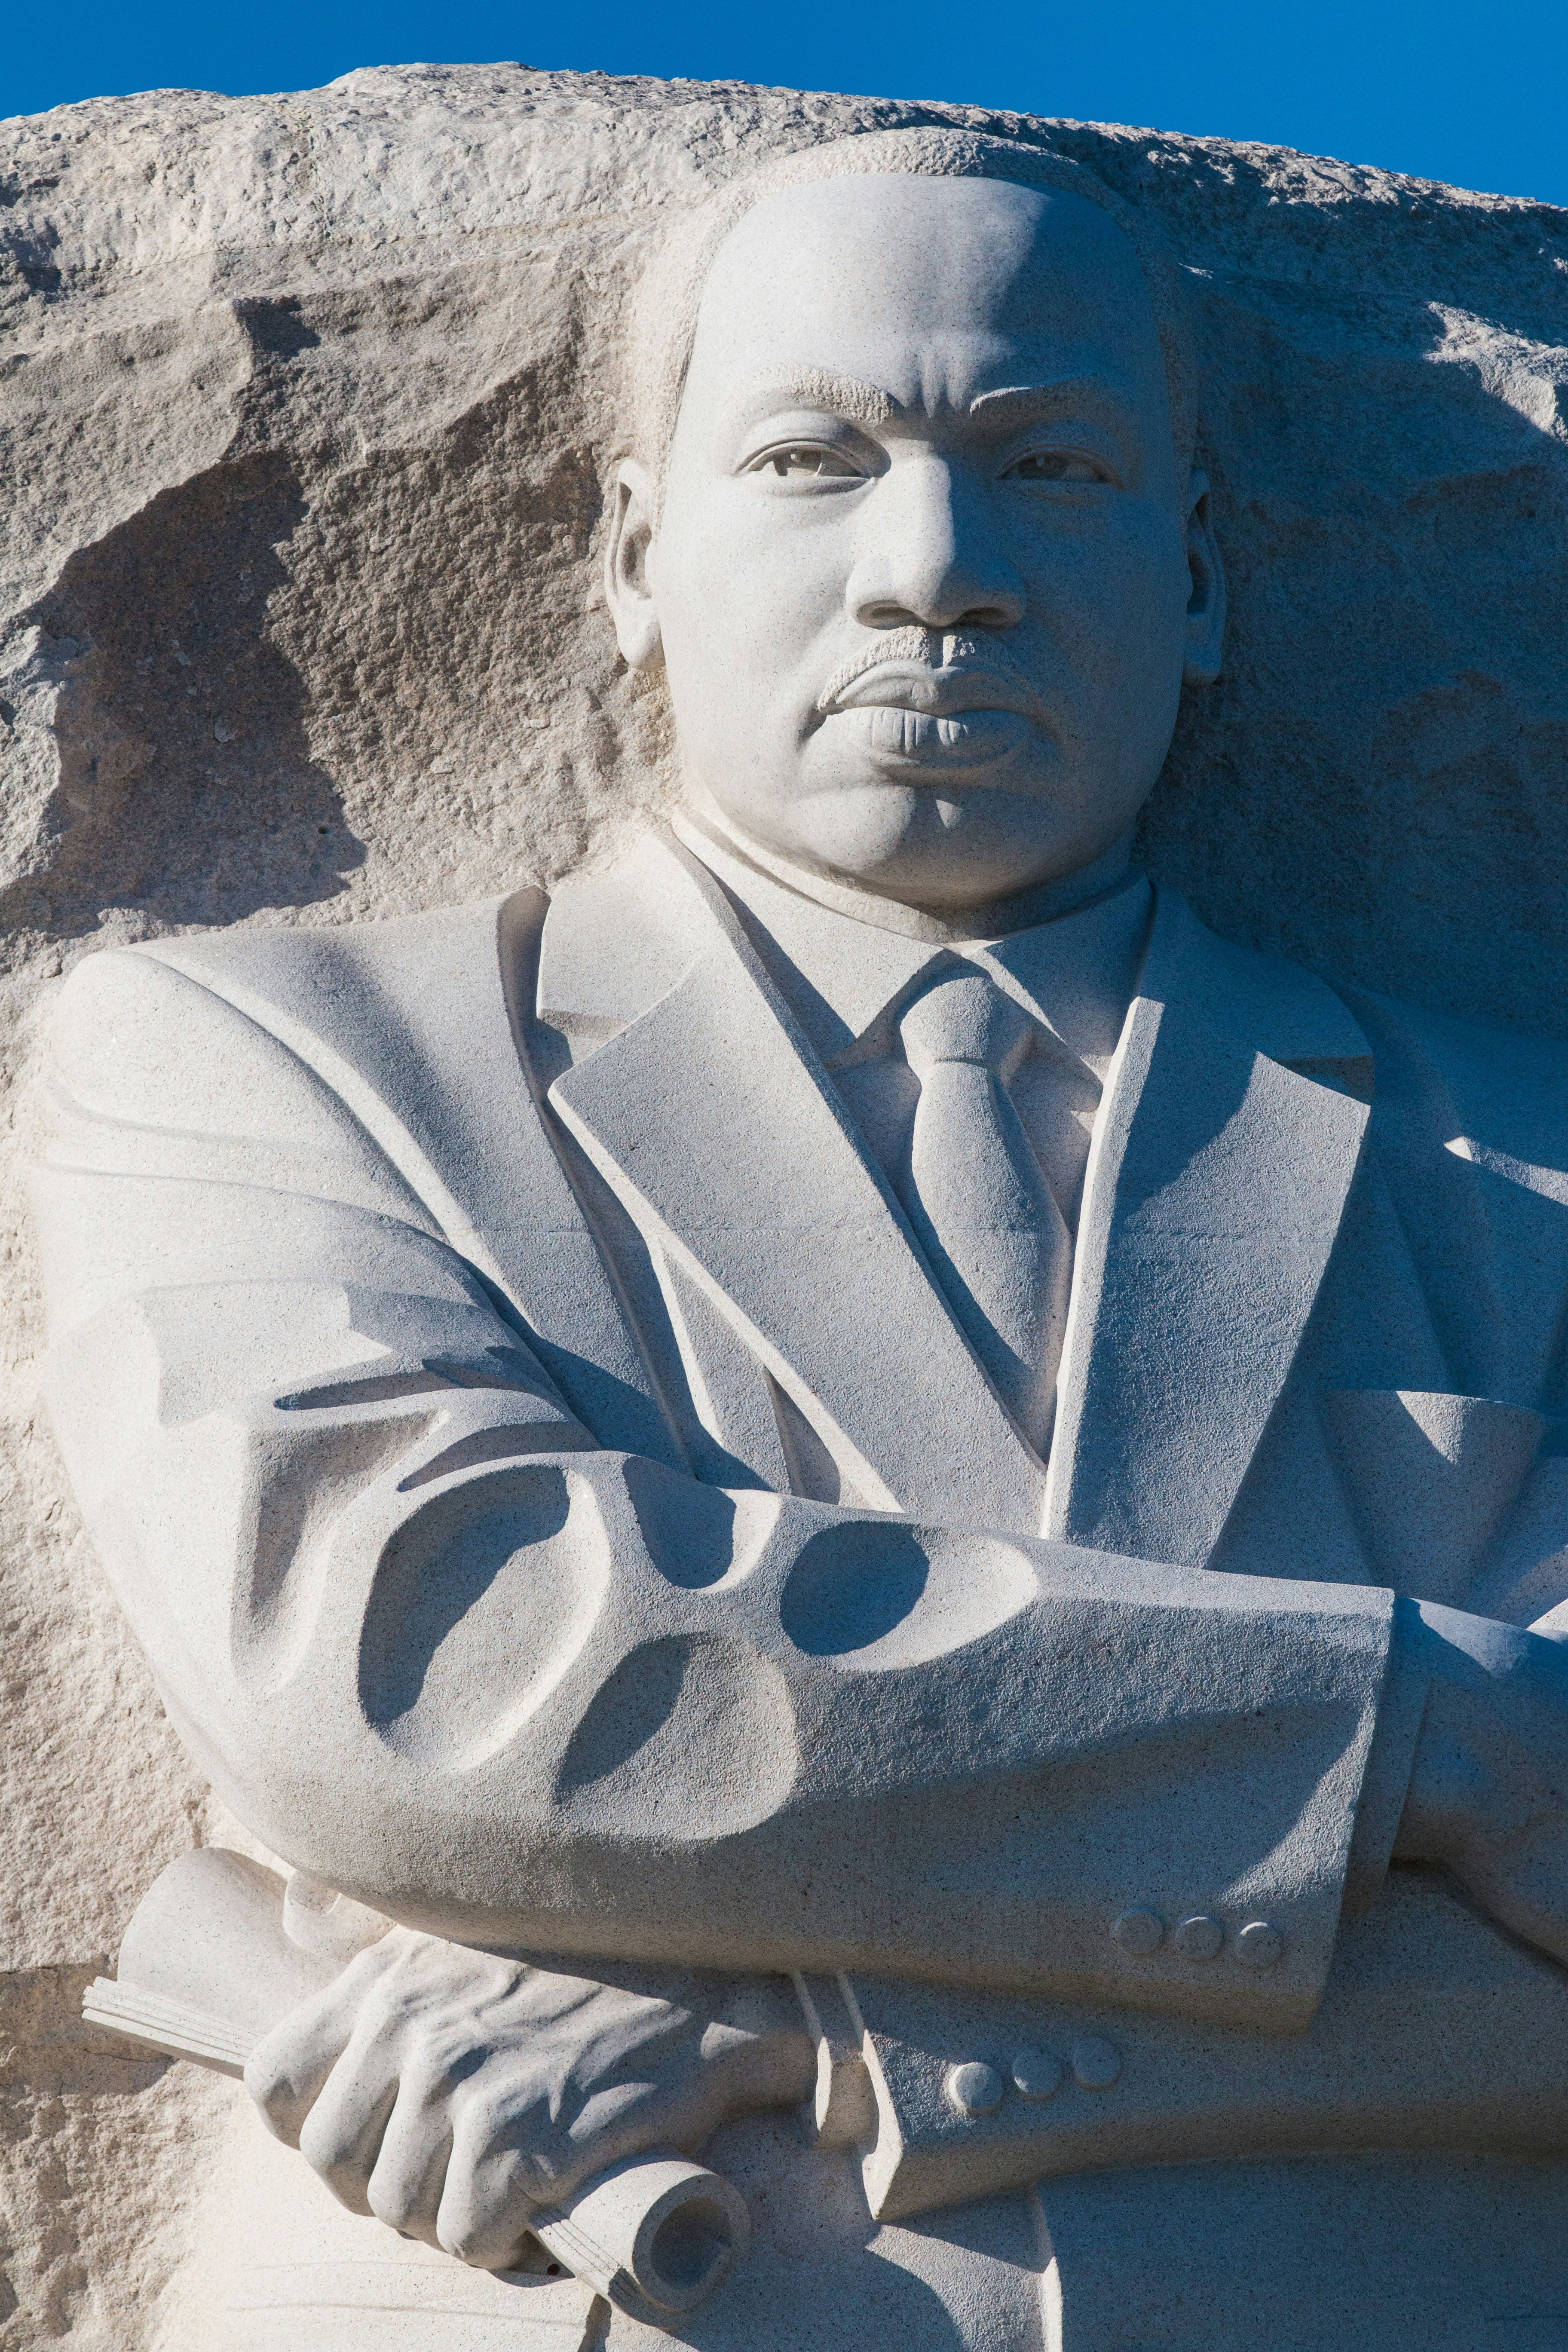 The Martin Luther King, Jr. Memorial in West Potomac Park next to the National Mall in Washington, D.C., United States.